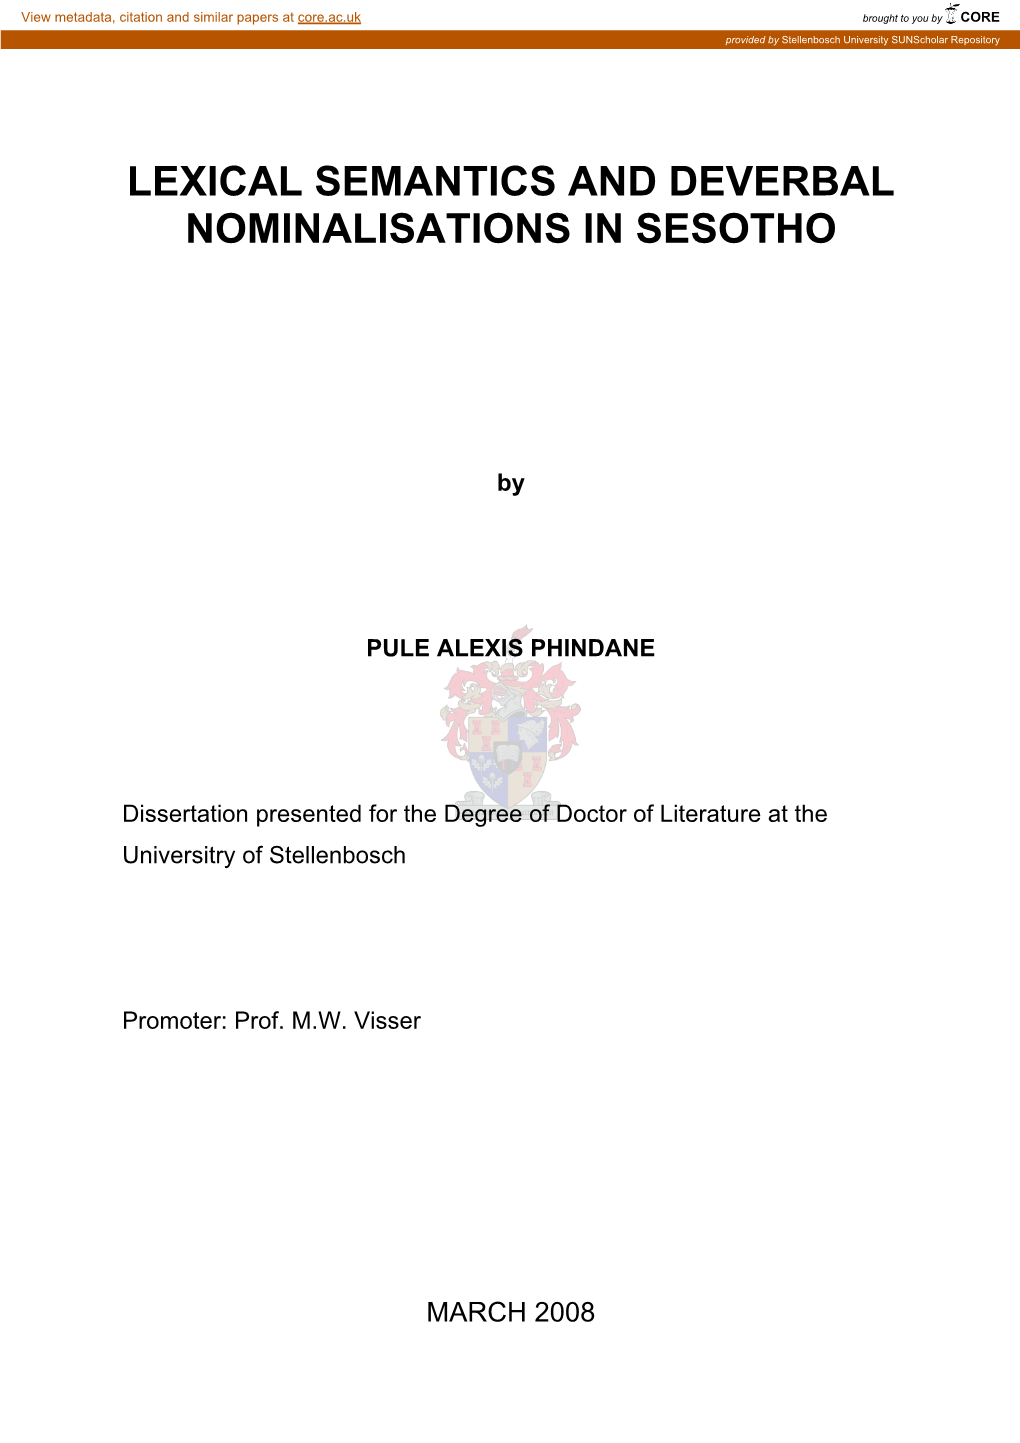 Lexical Semantics and Deverbal Nominalisations in Sesotho